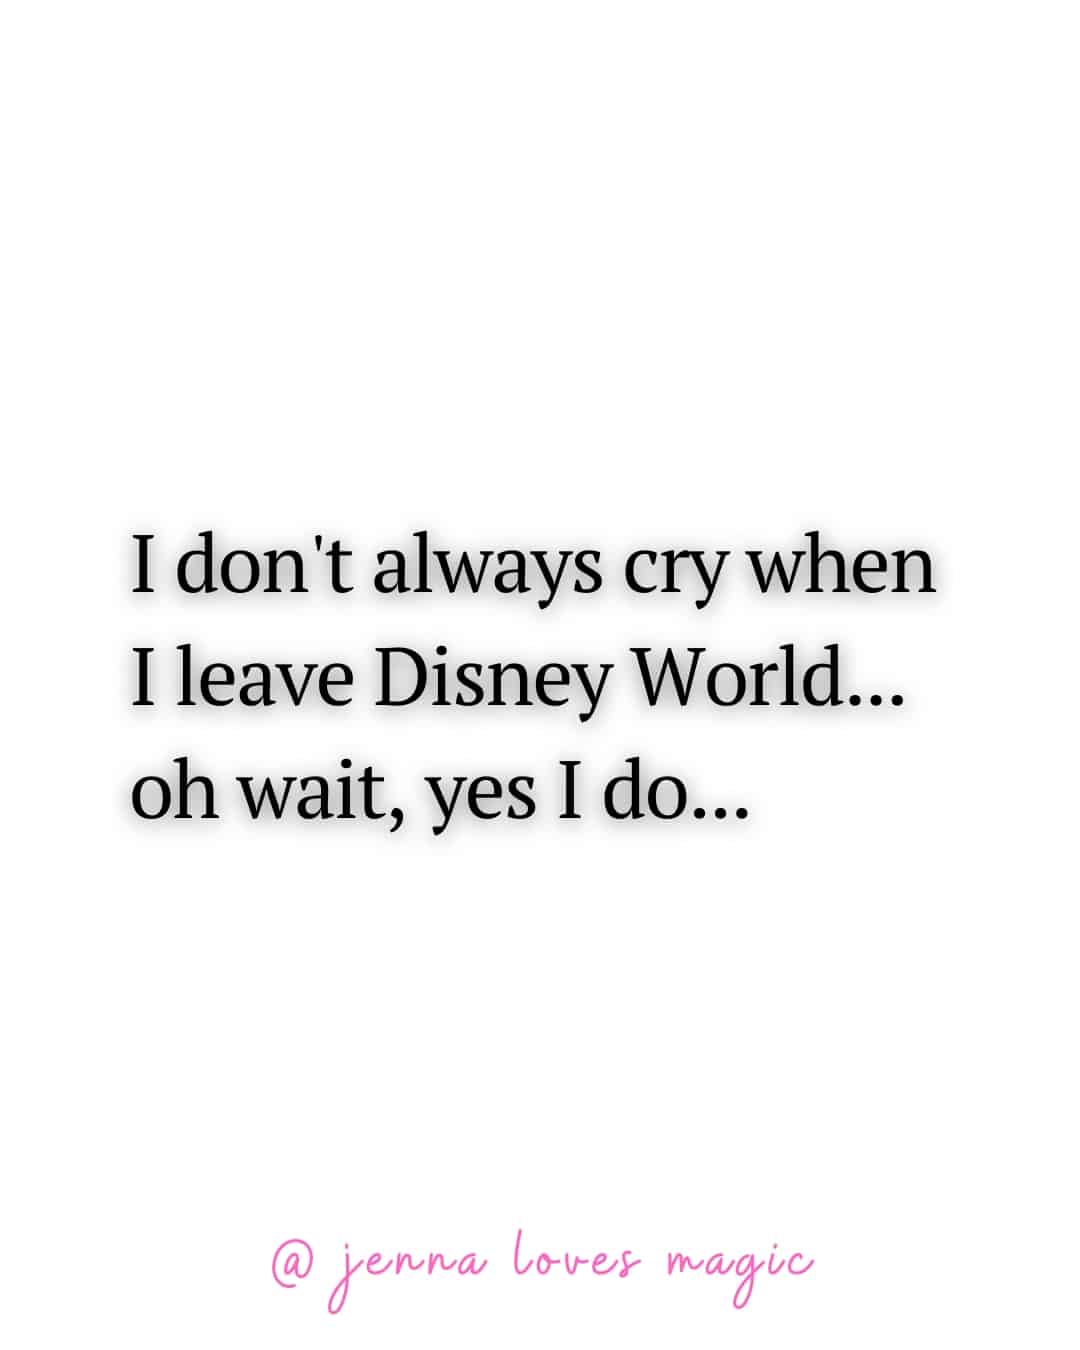 I don't always cry when I leave Disney World quote cute